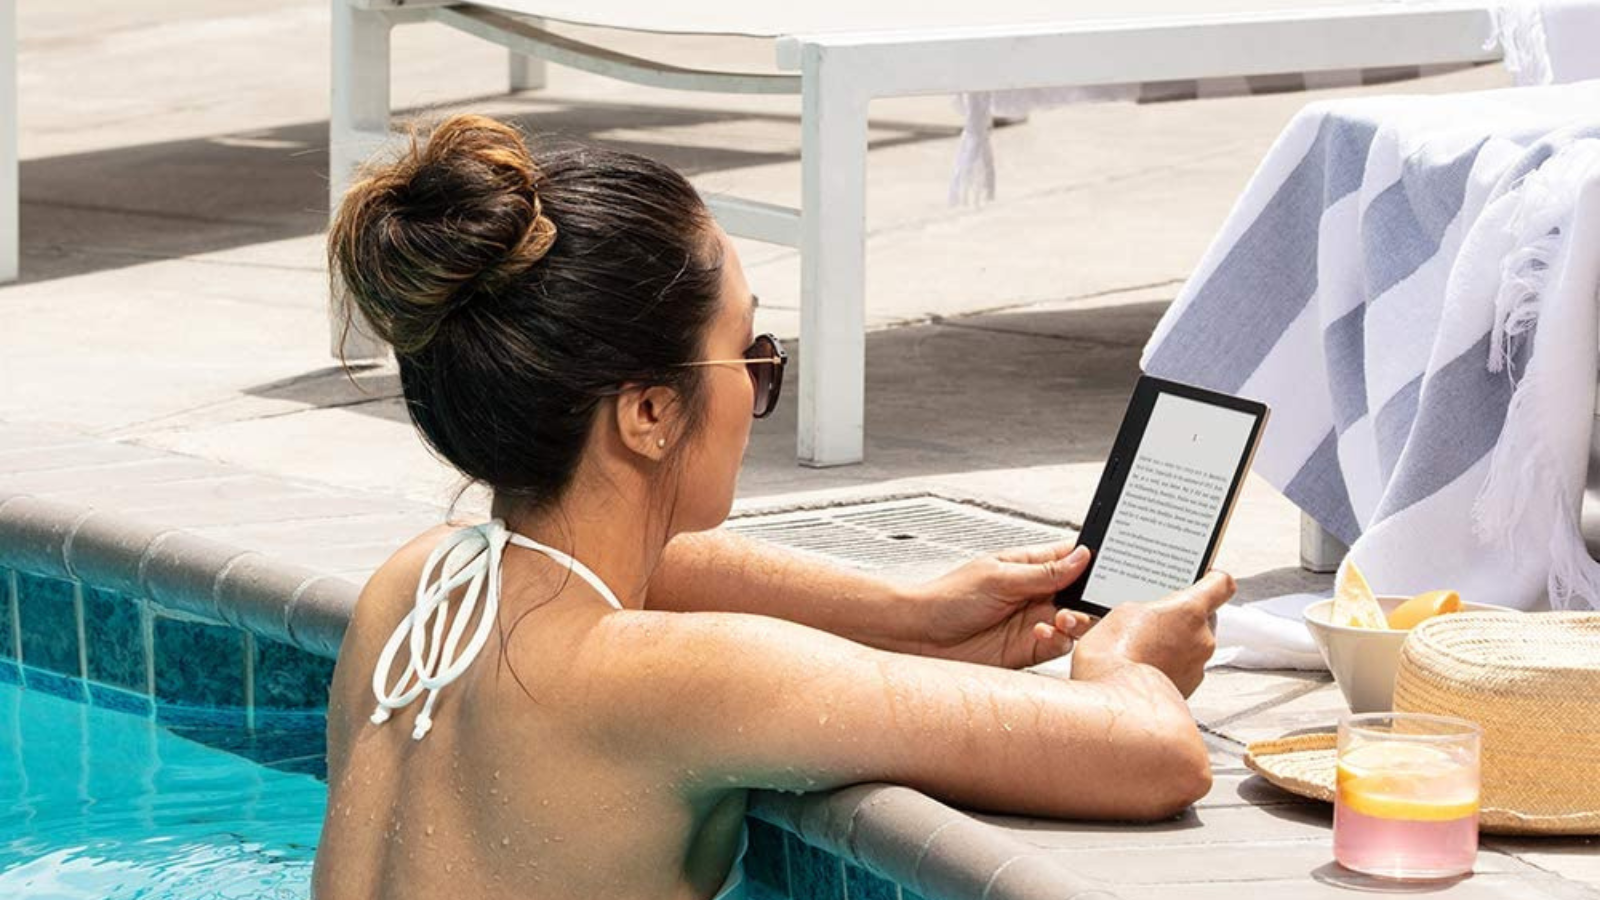 woman reading on kindle oasis while in the pool